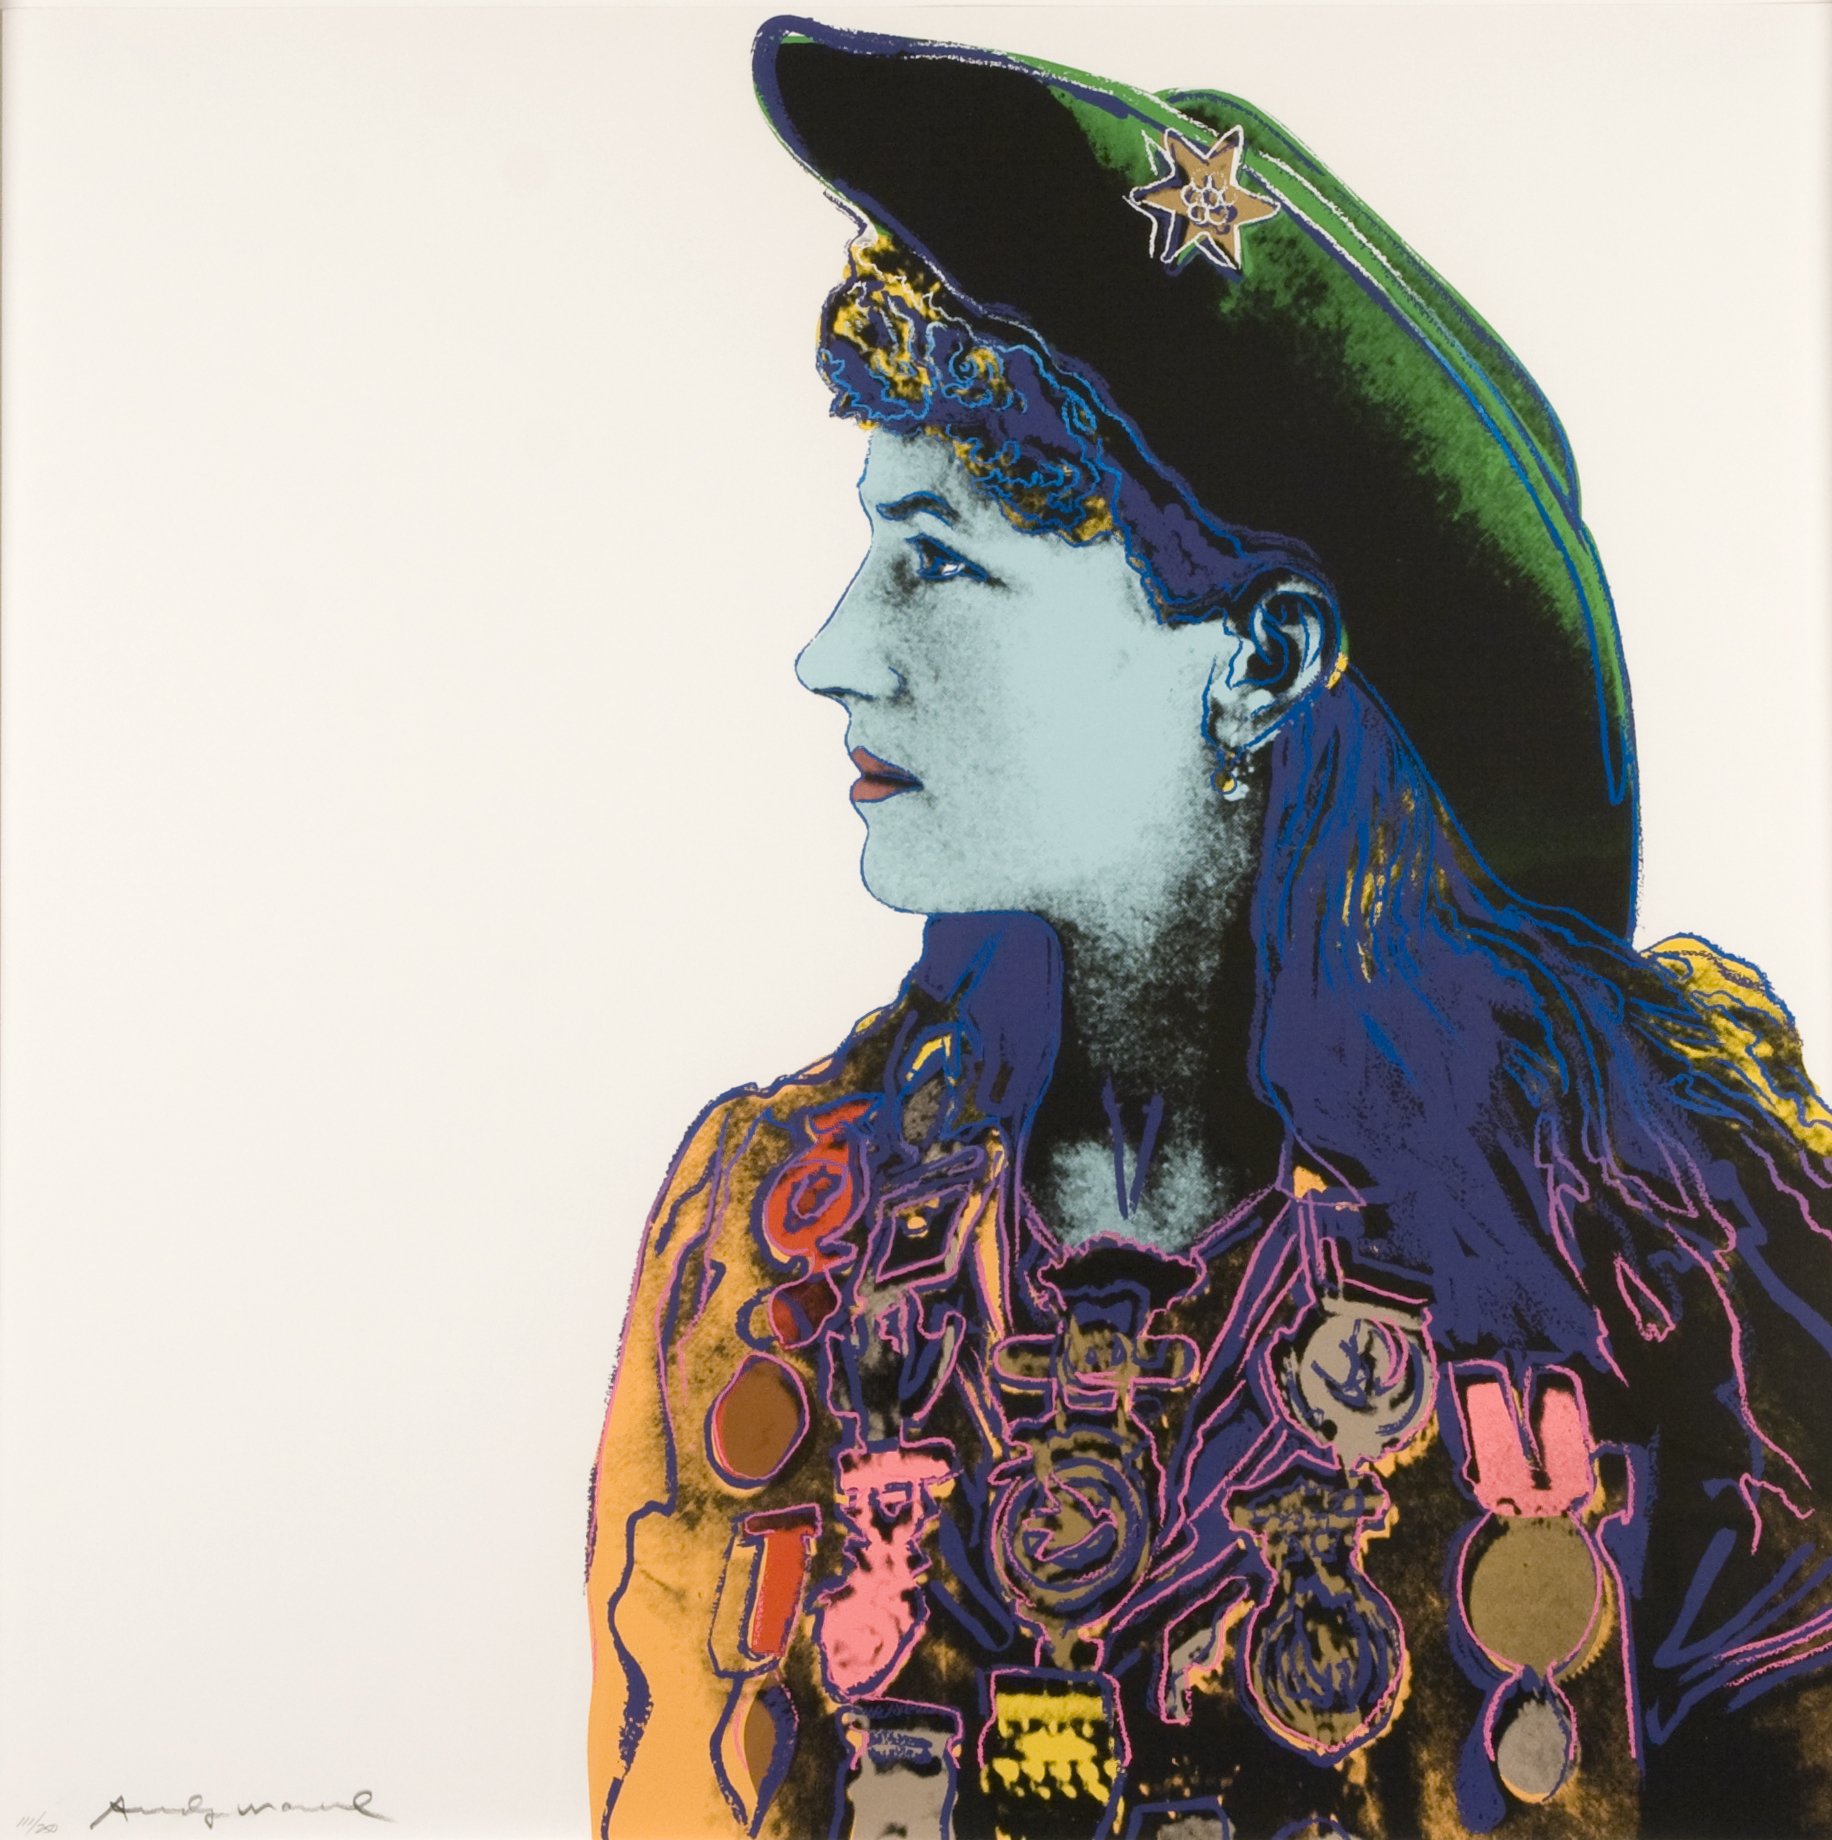   Annie Oakley  (from the  Cowboys and Indians  series), 1986 by Andy Warhol © 2024 The Andy Warhol Foundation for the Visual Arts, Inc. / Licensed by Artists Rights Society (ARS), New York 